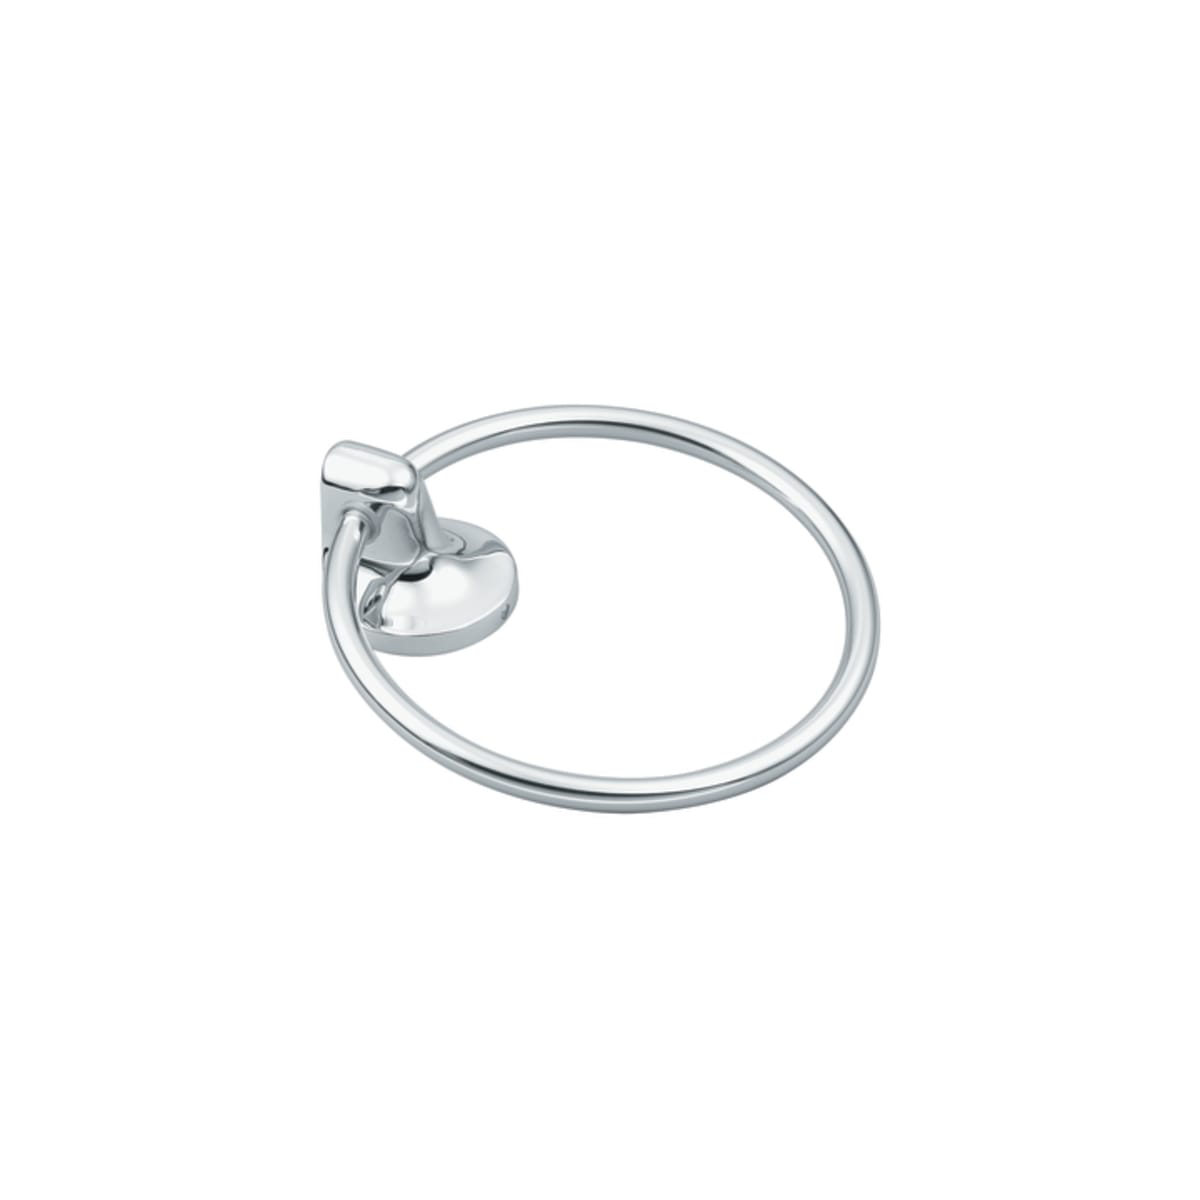 Moen 5886CH Towel Ring from the Aspen Collection | Build.com